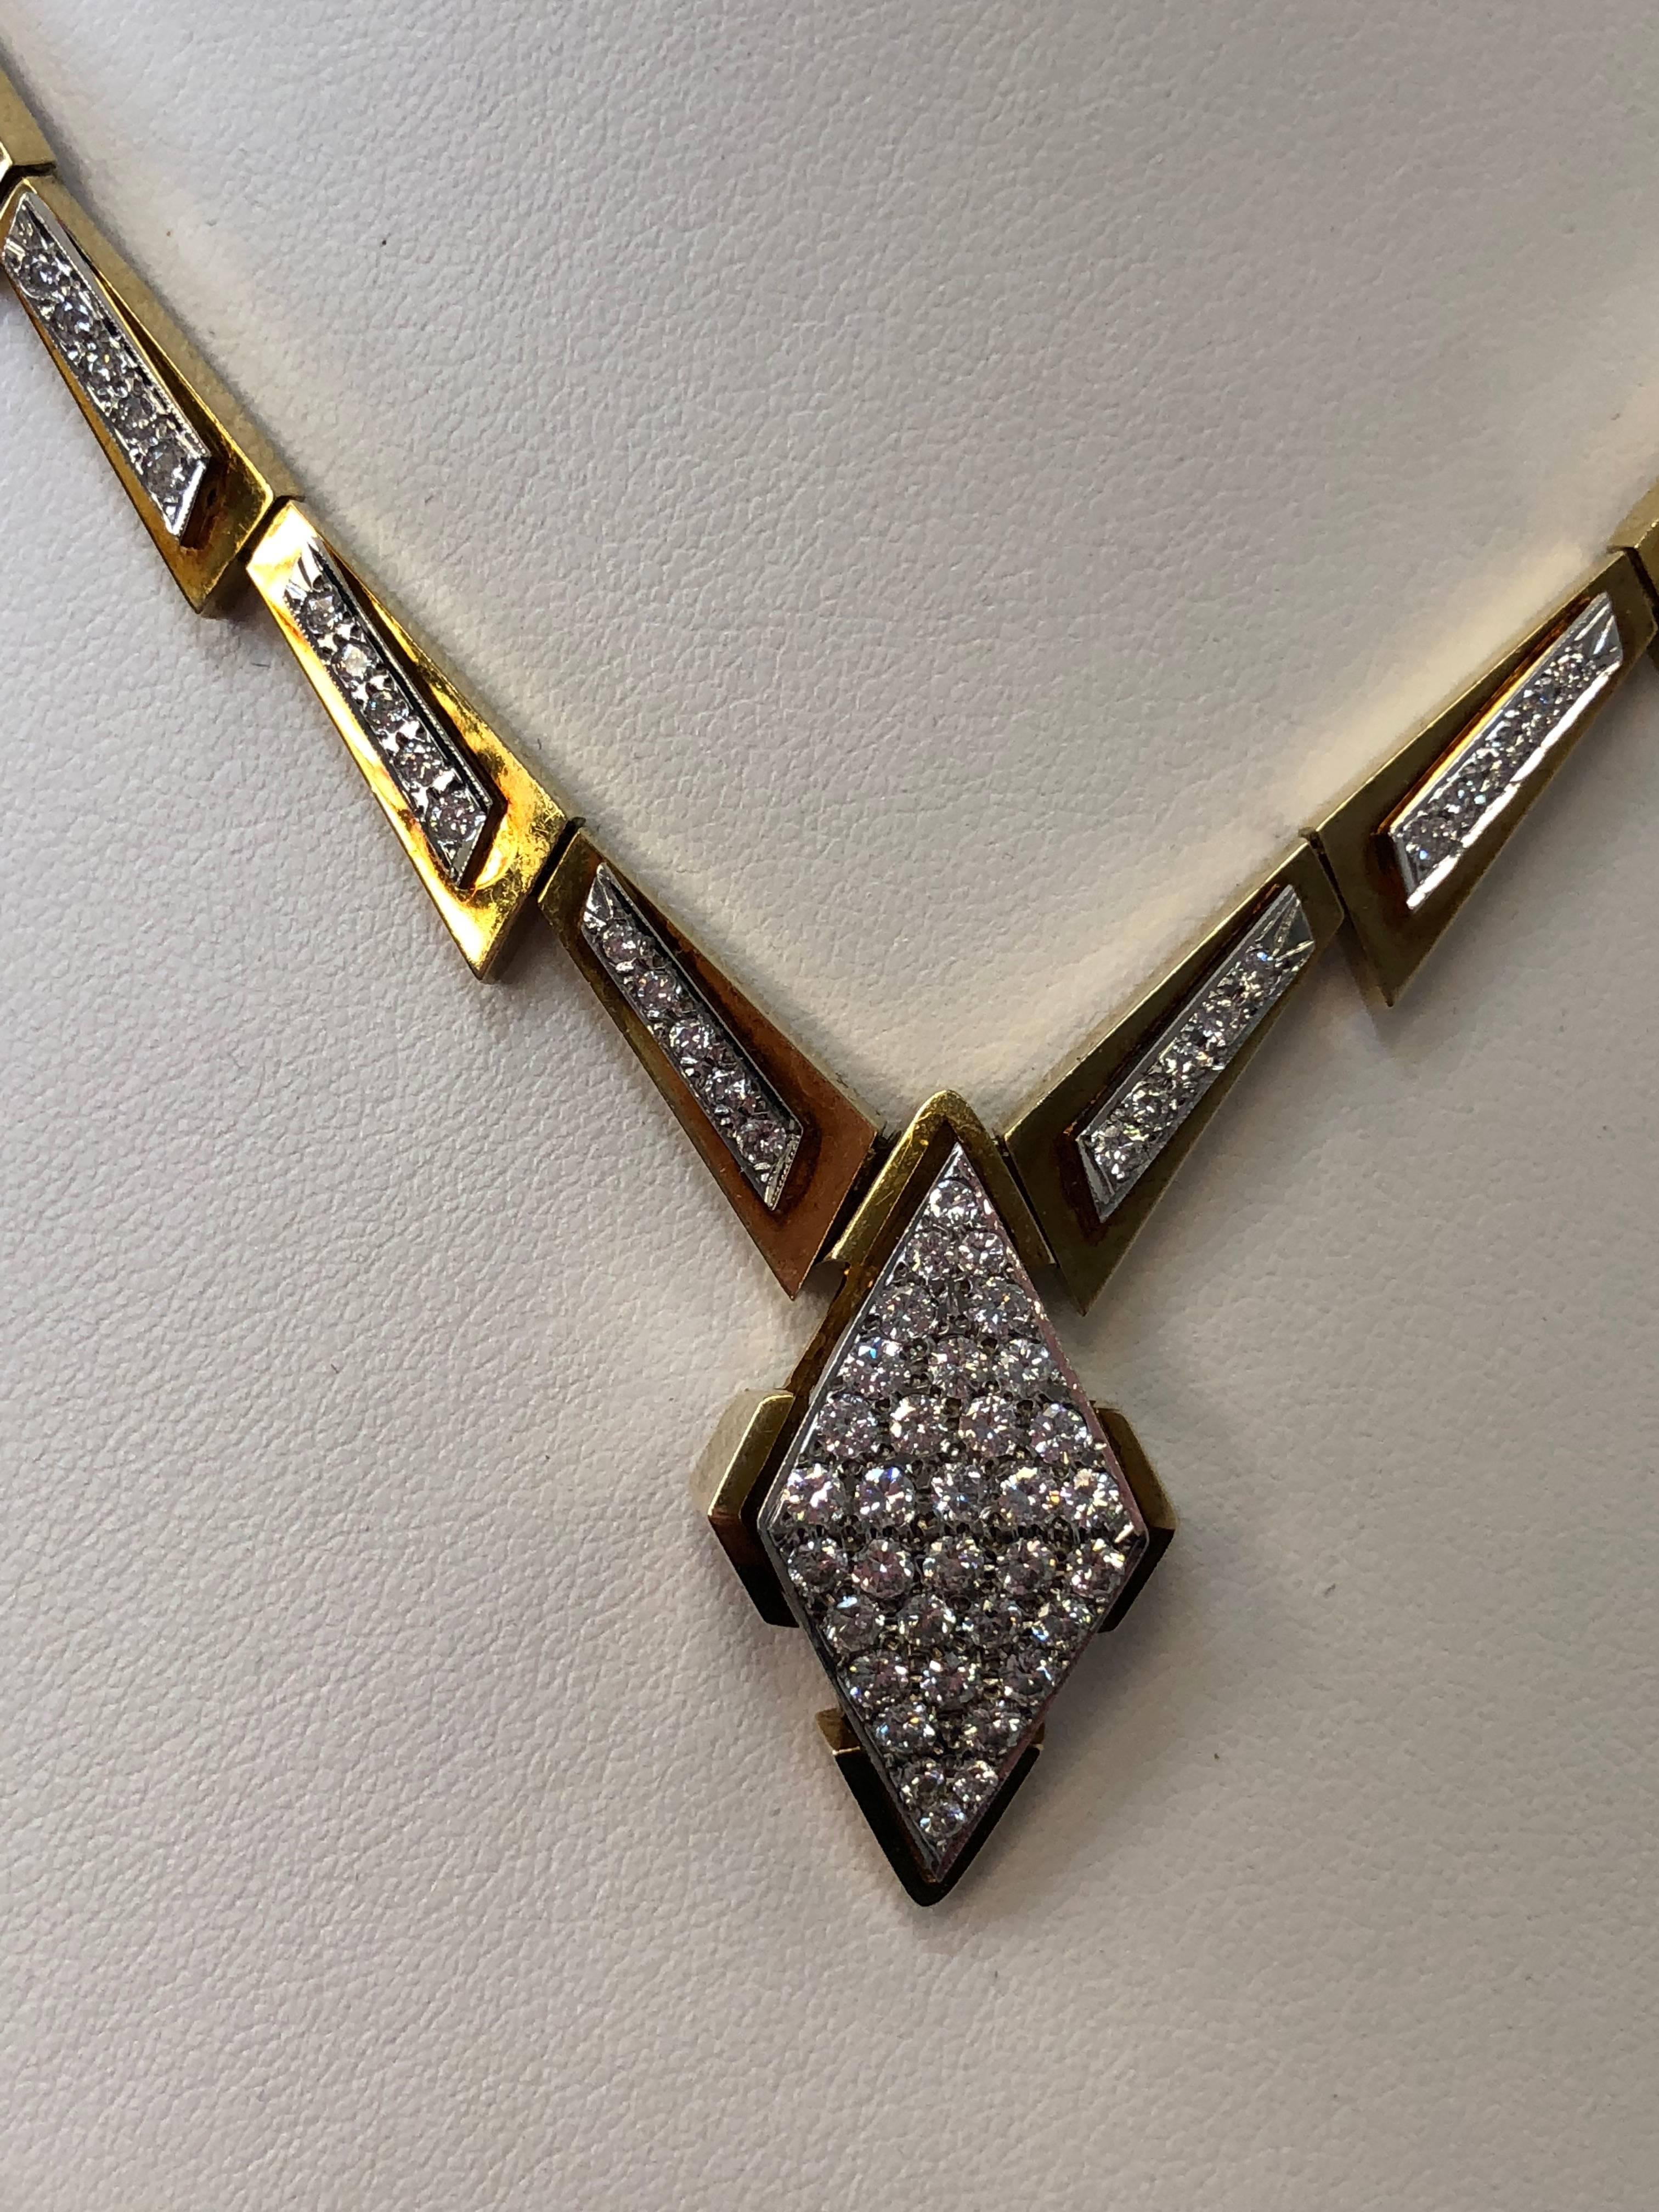 2.50 carats of white diamond rounds in this unique design.  This necklace is in 14k yellow gold and 18